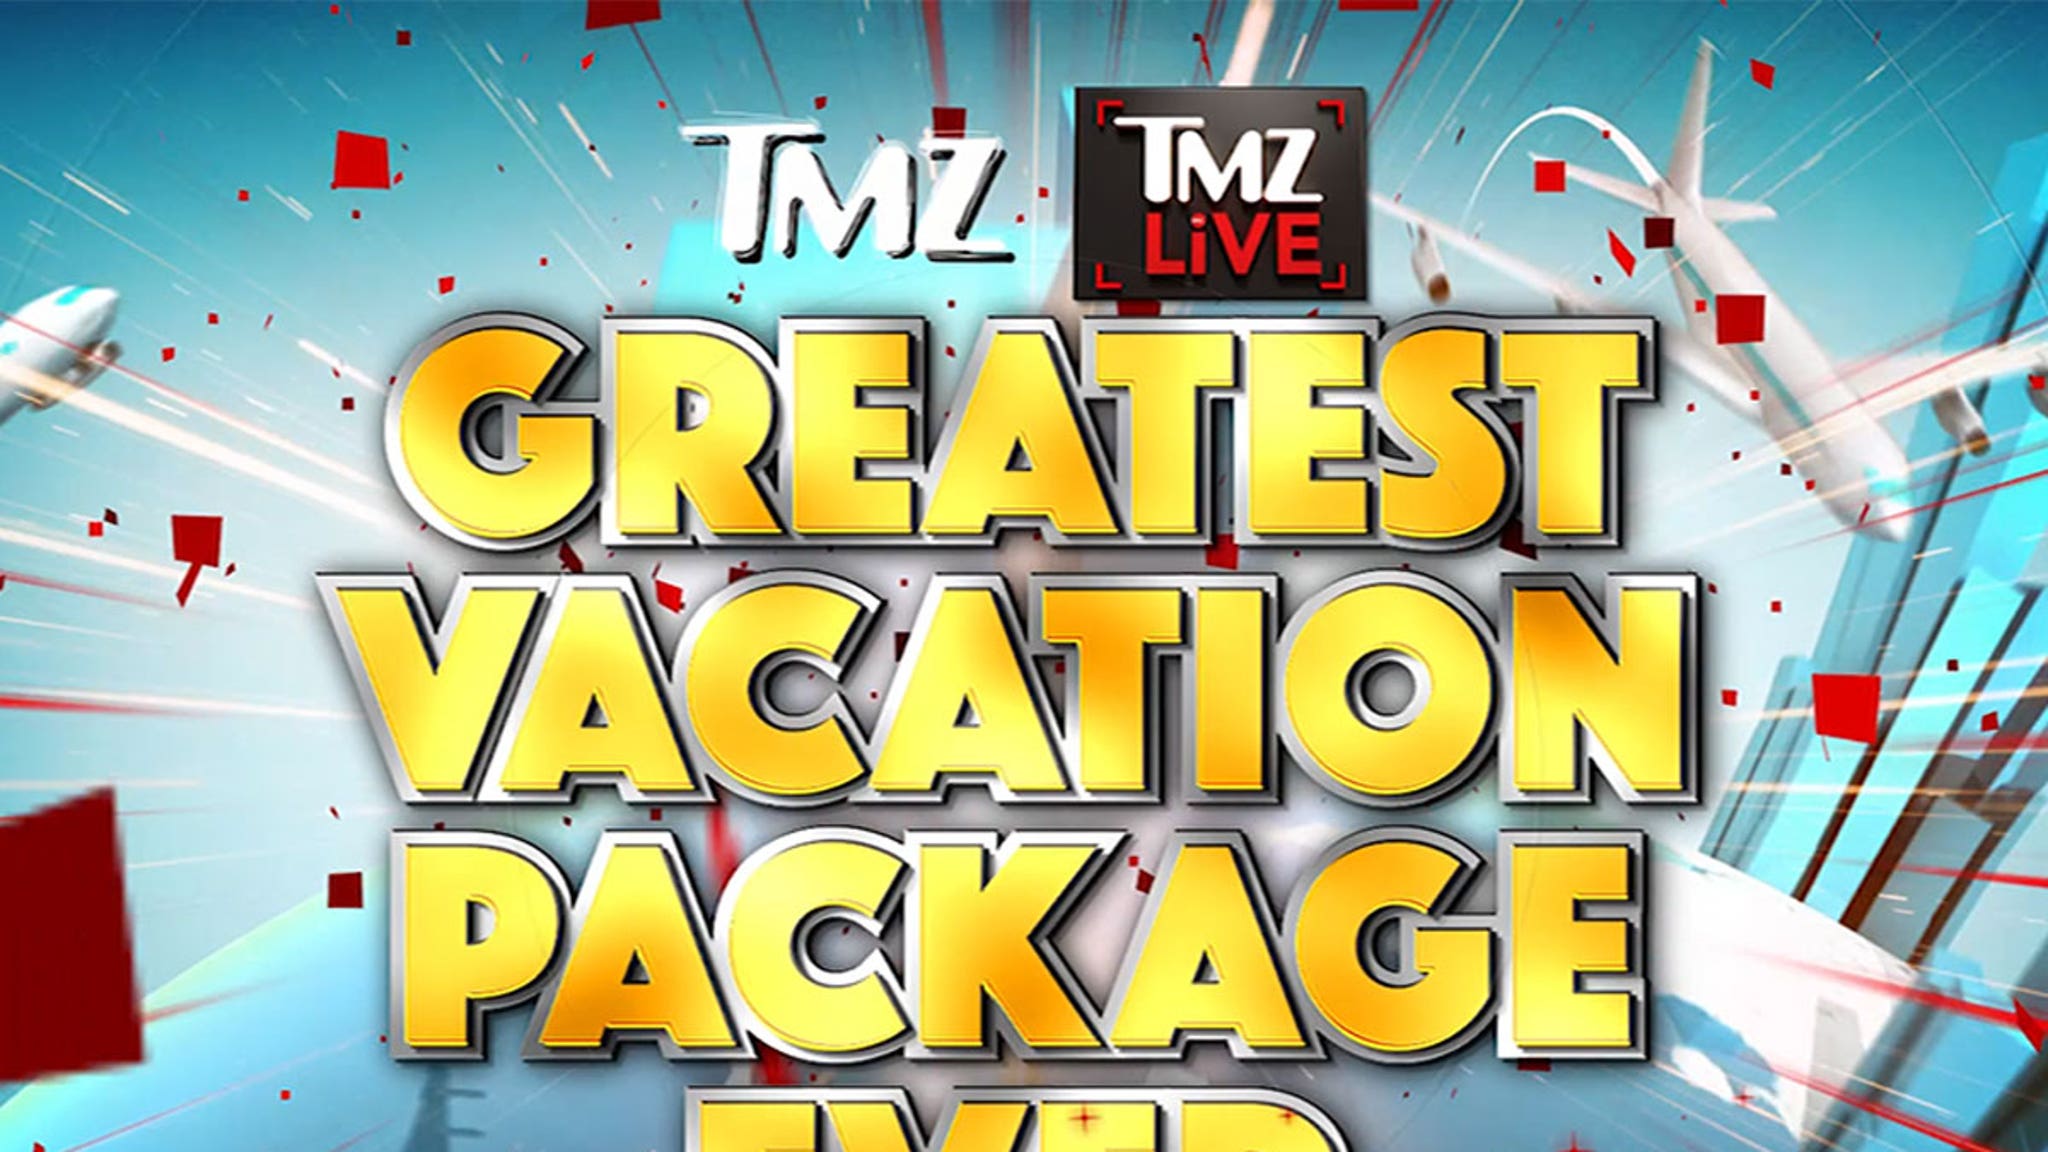 TMZ’s Giving Away ‘Greatest Vacation Package Ever,’ 4 Weeks Worldwide